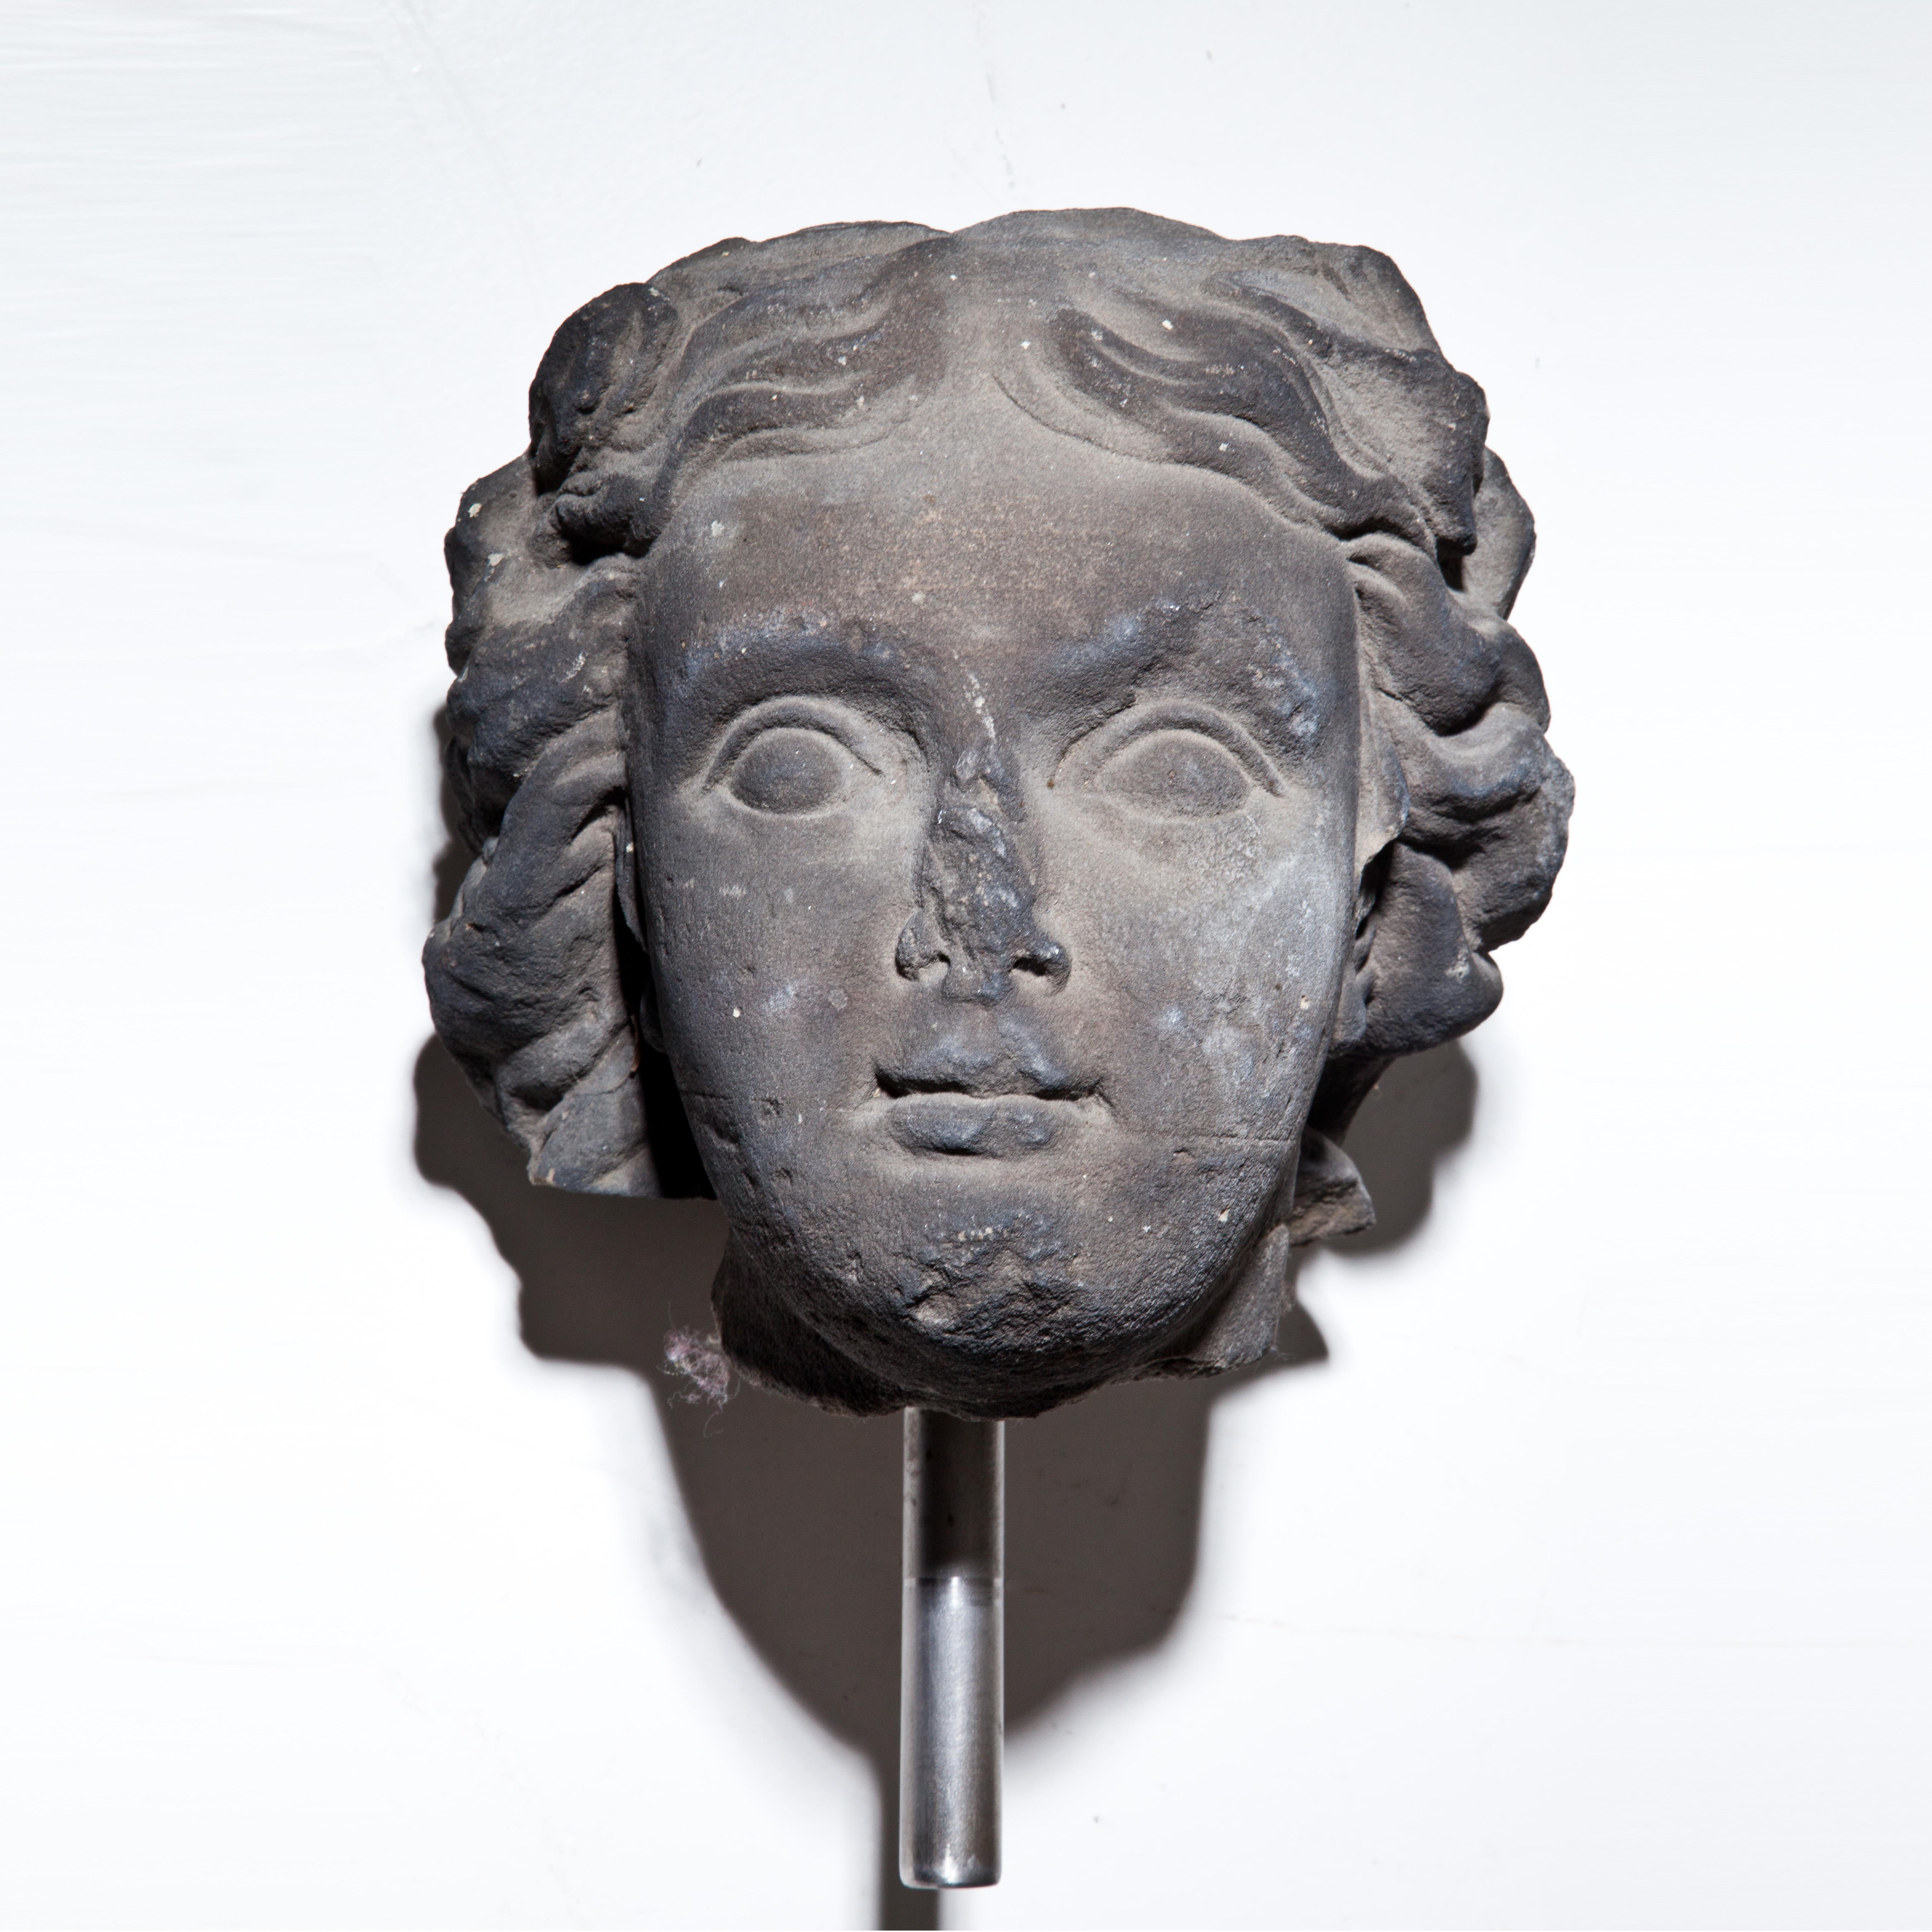 Baroque fragment of a sandstone head, hand carved with bumps on the chin, nose and the curly hair. Mounted on a metal rod. Discoloration of the stone due to weathering. Length without rod: 23 cm.